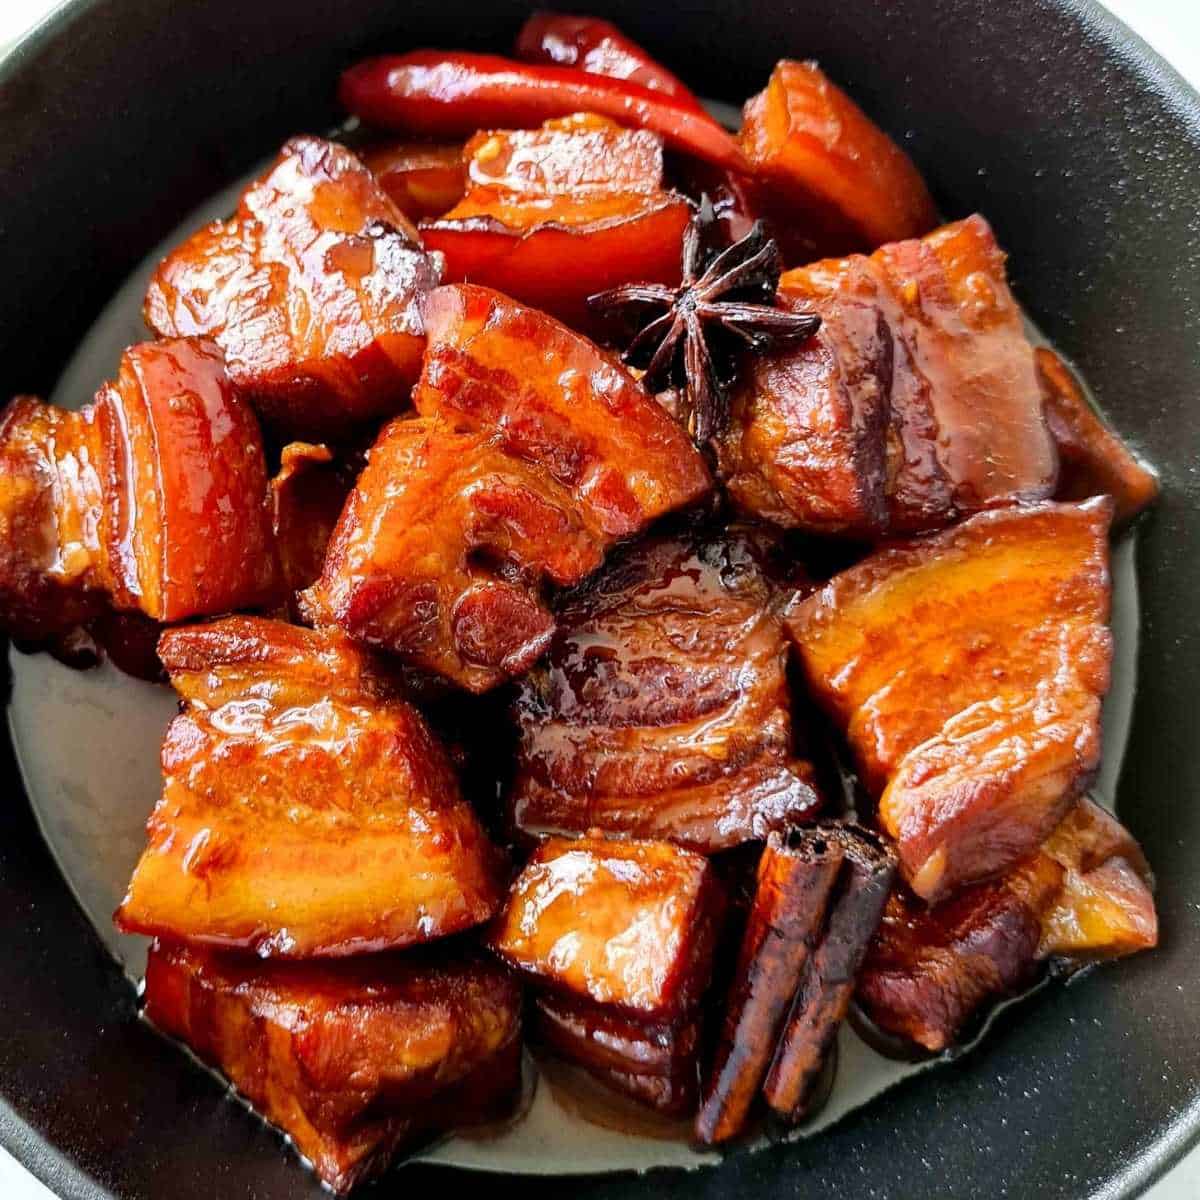 https://casuallypeckish.com/wp-content/uploads/2022/02/Hong-shao-rou-red-braised-pork-belly-1.jpg